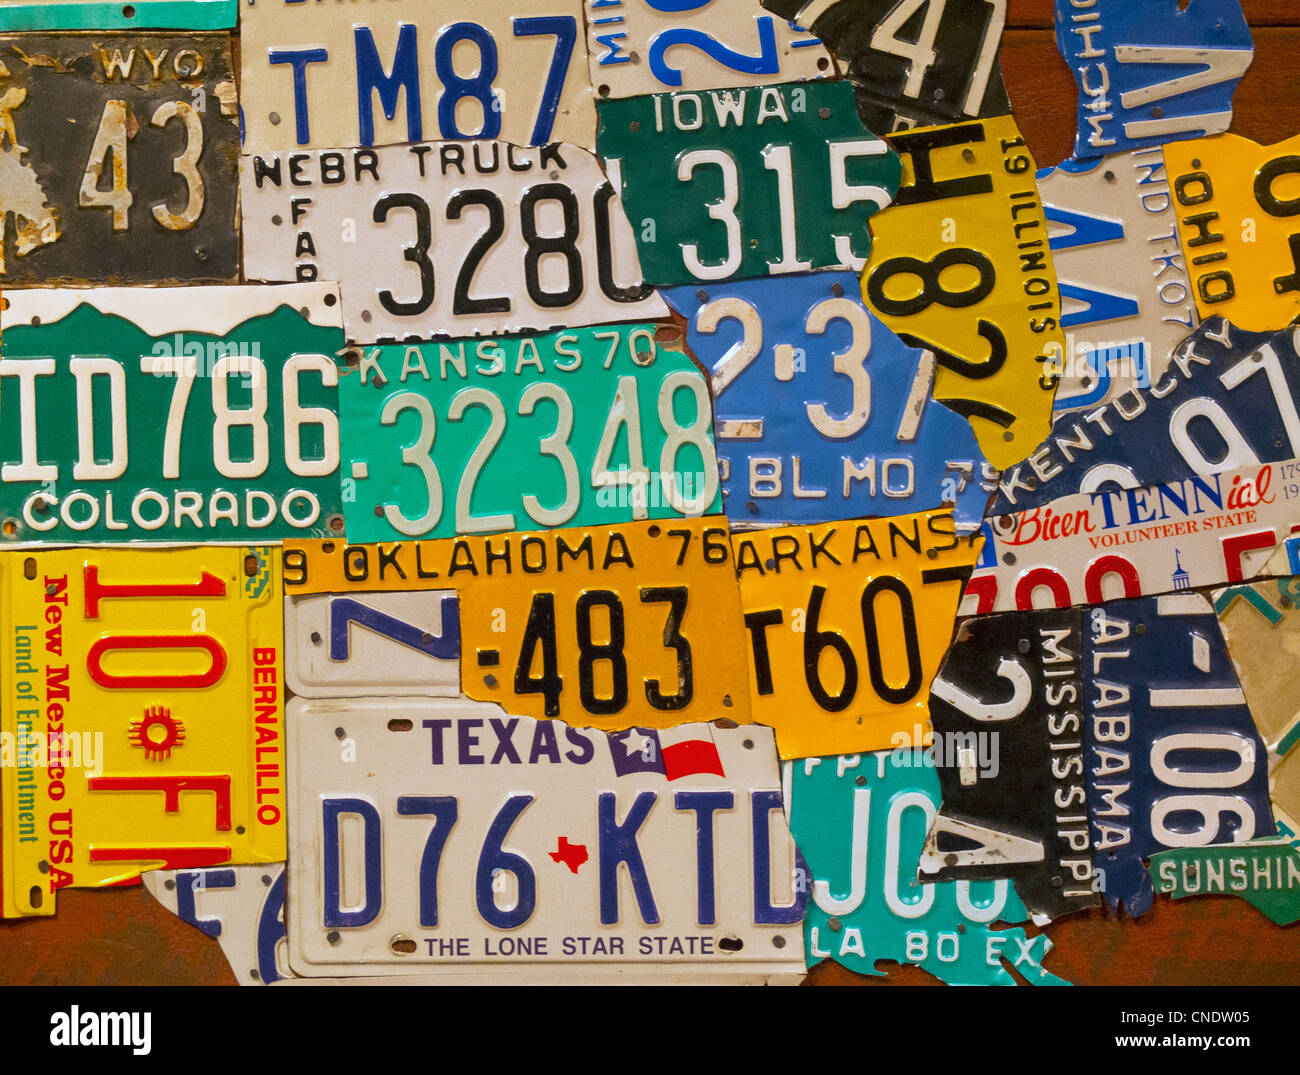 Map Made With License Plates CNDW05 